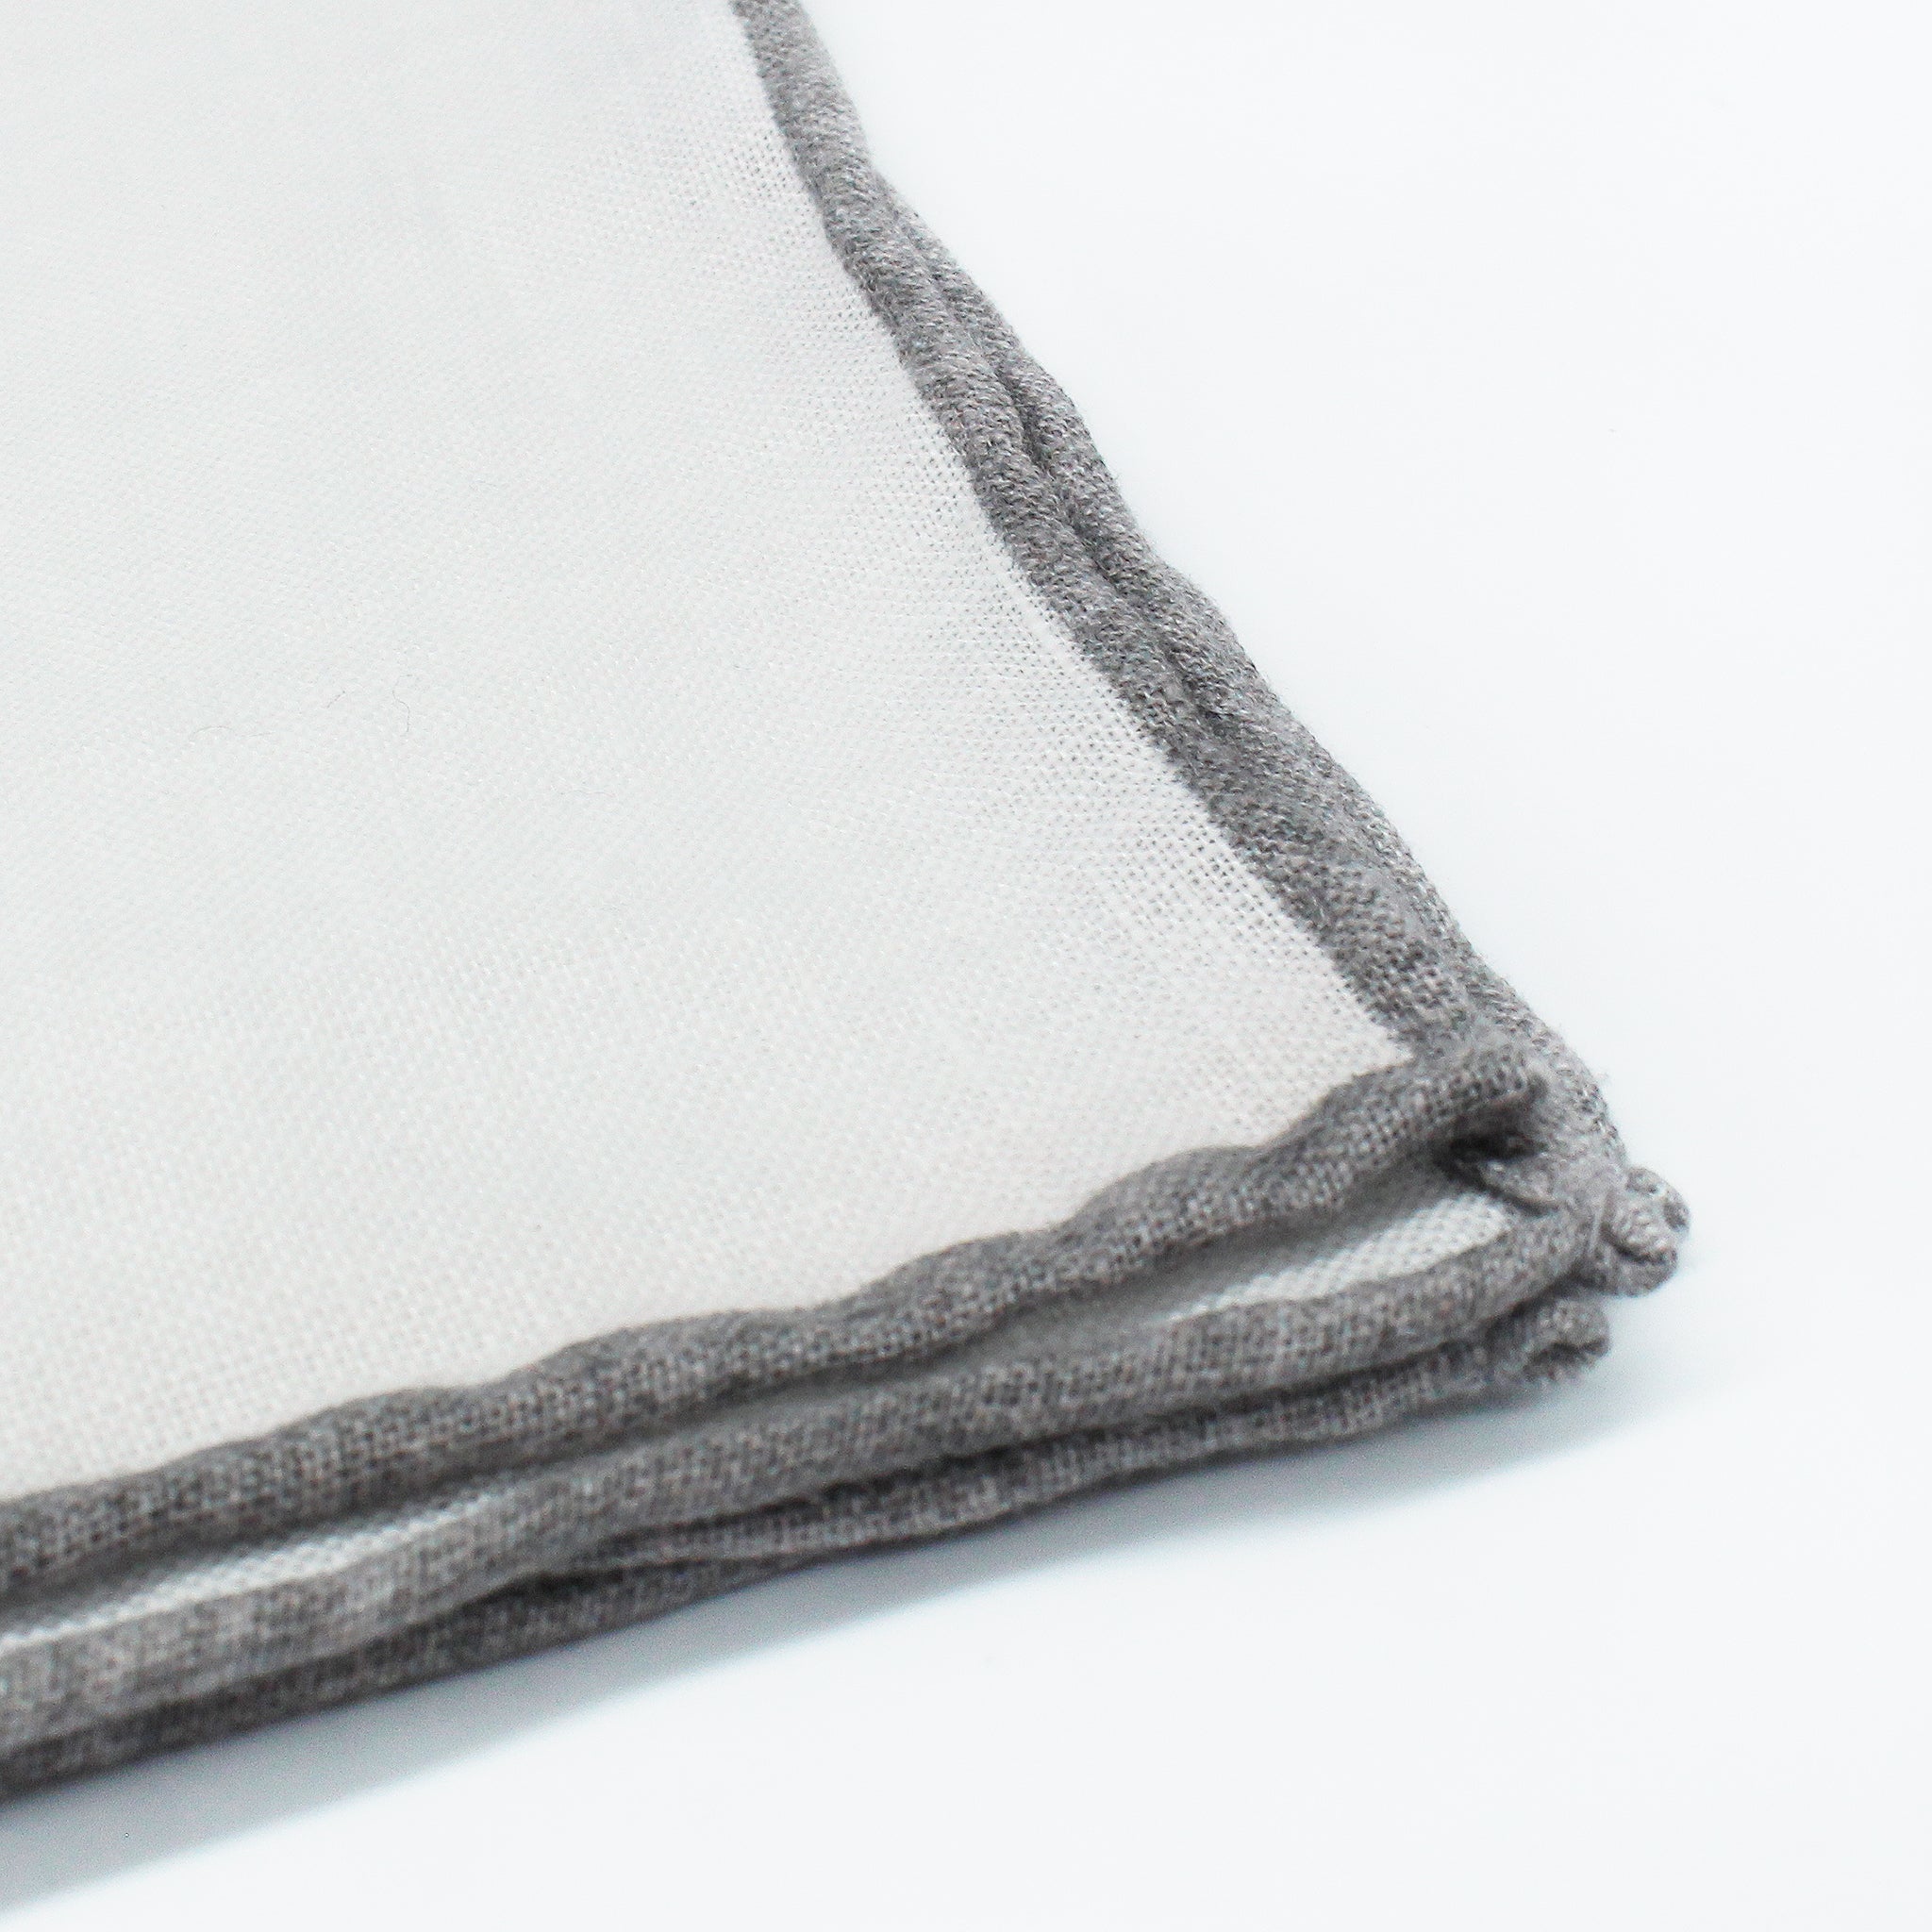 Linen pocket square with white background and gray border